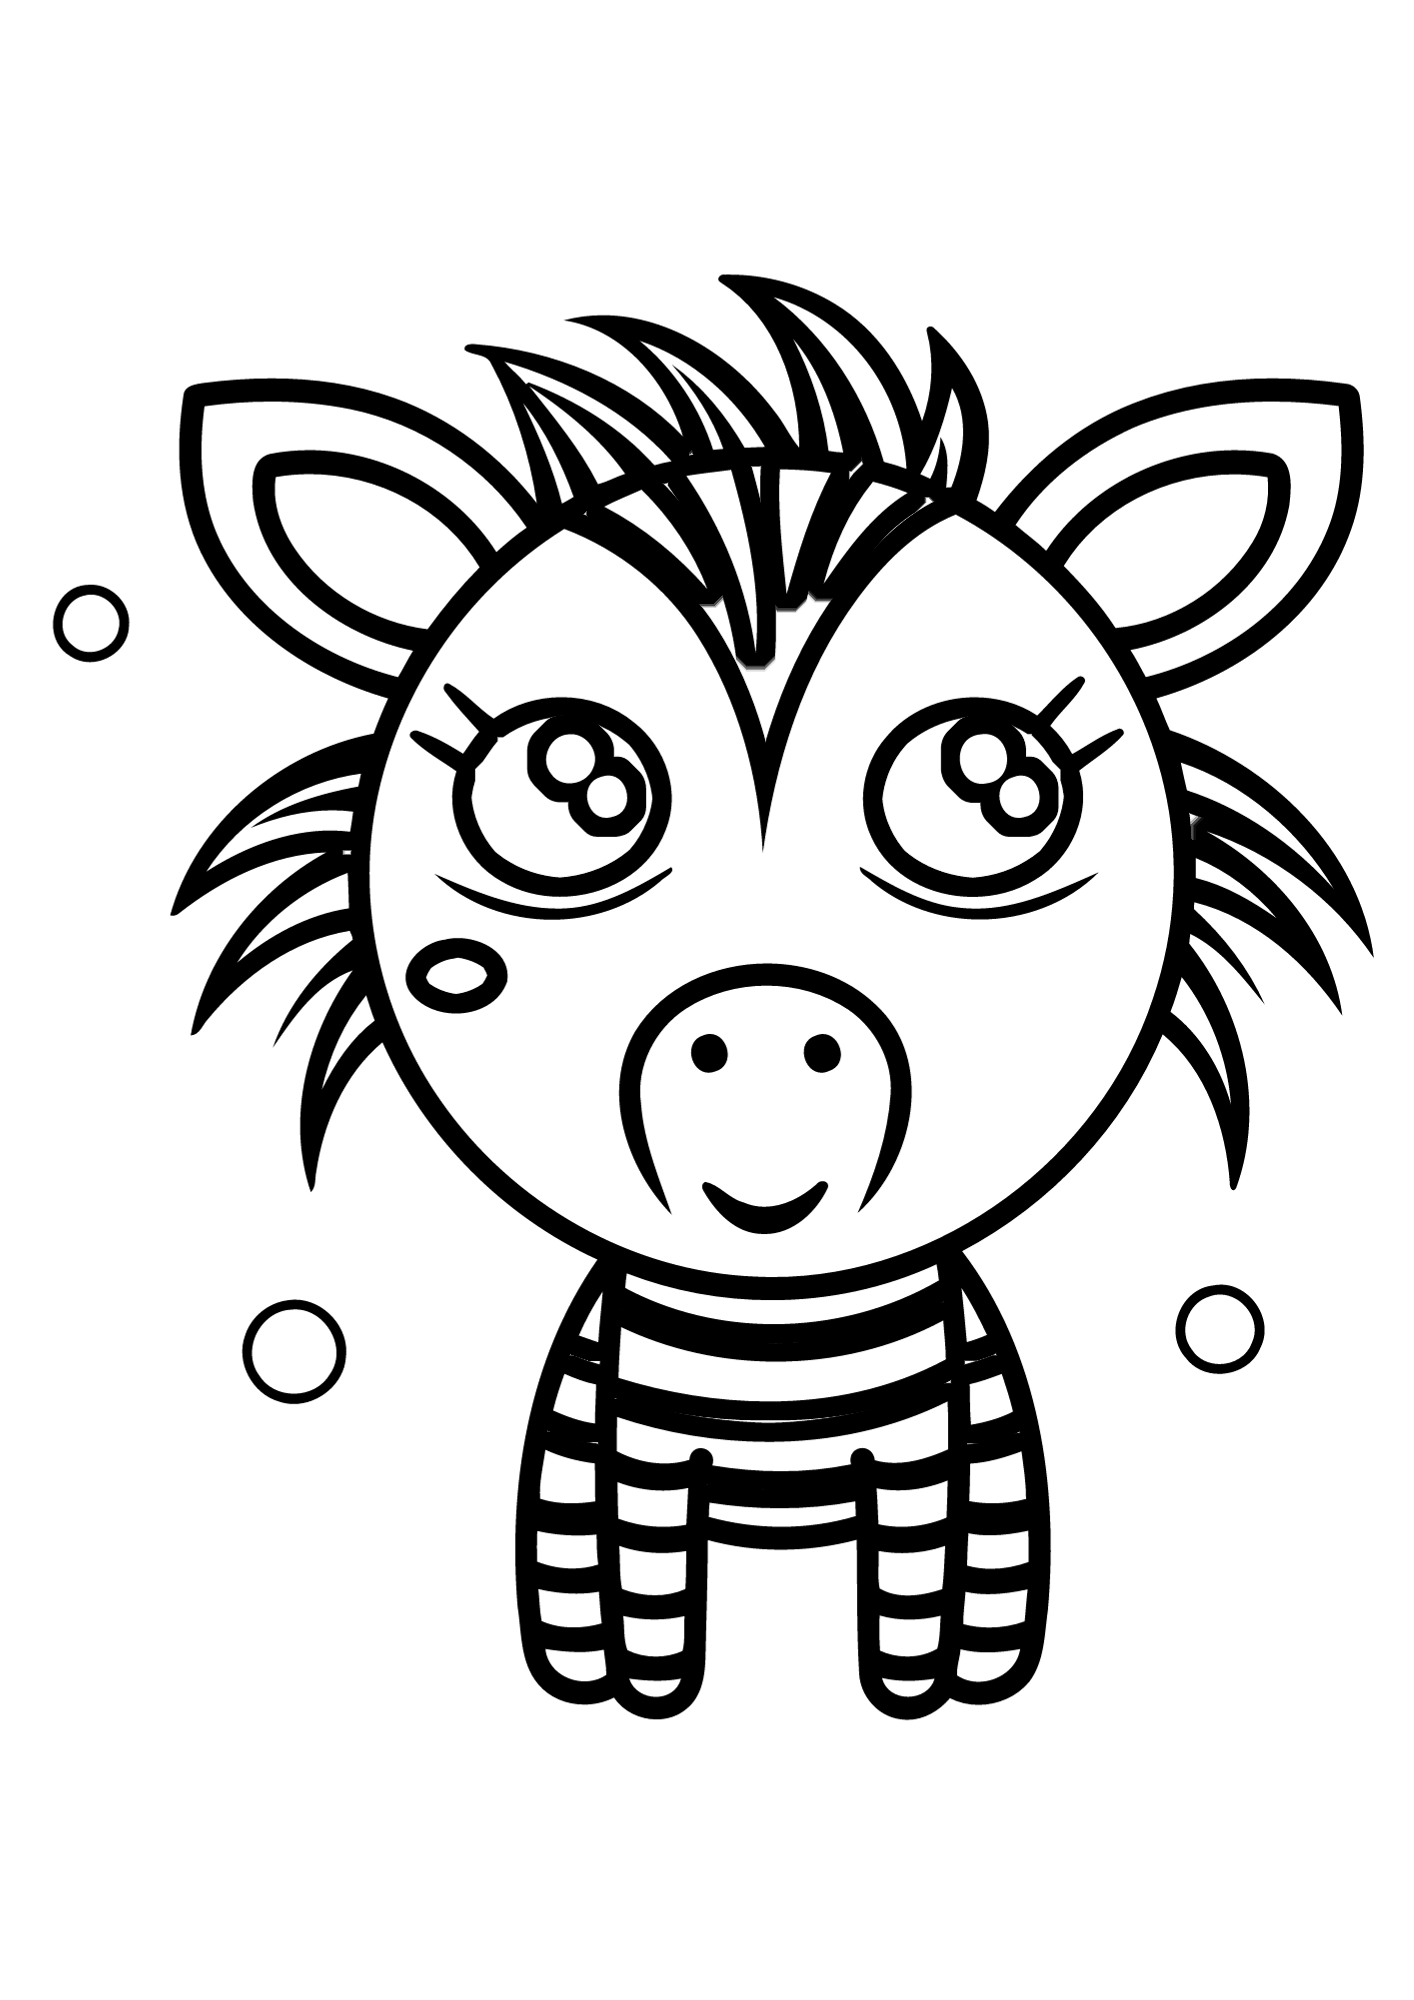 Funny Zebra Coloring Pages